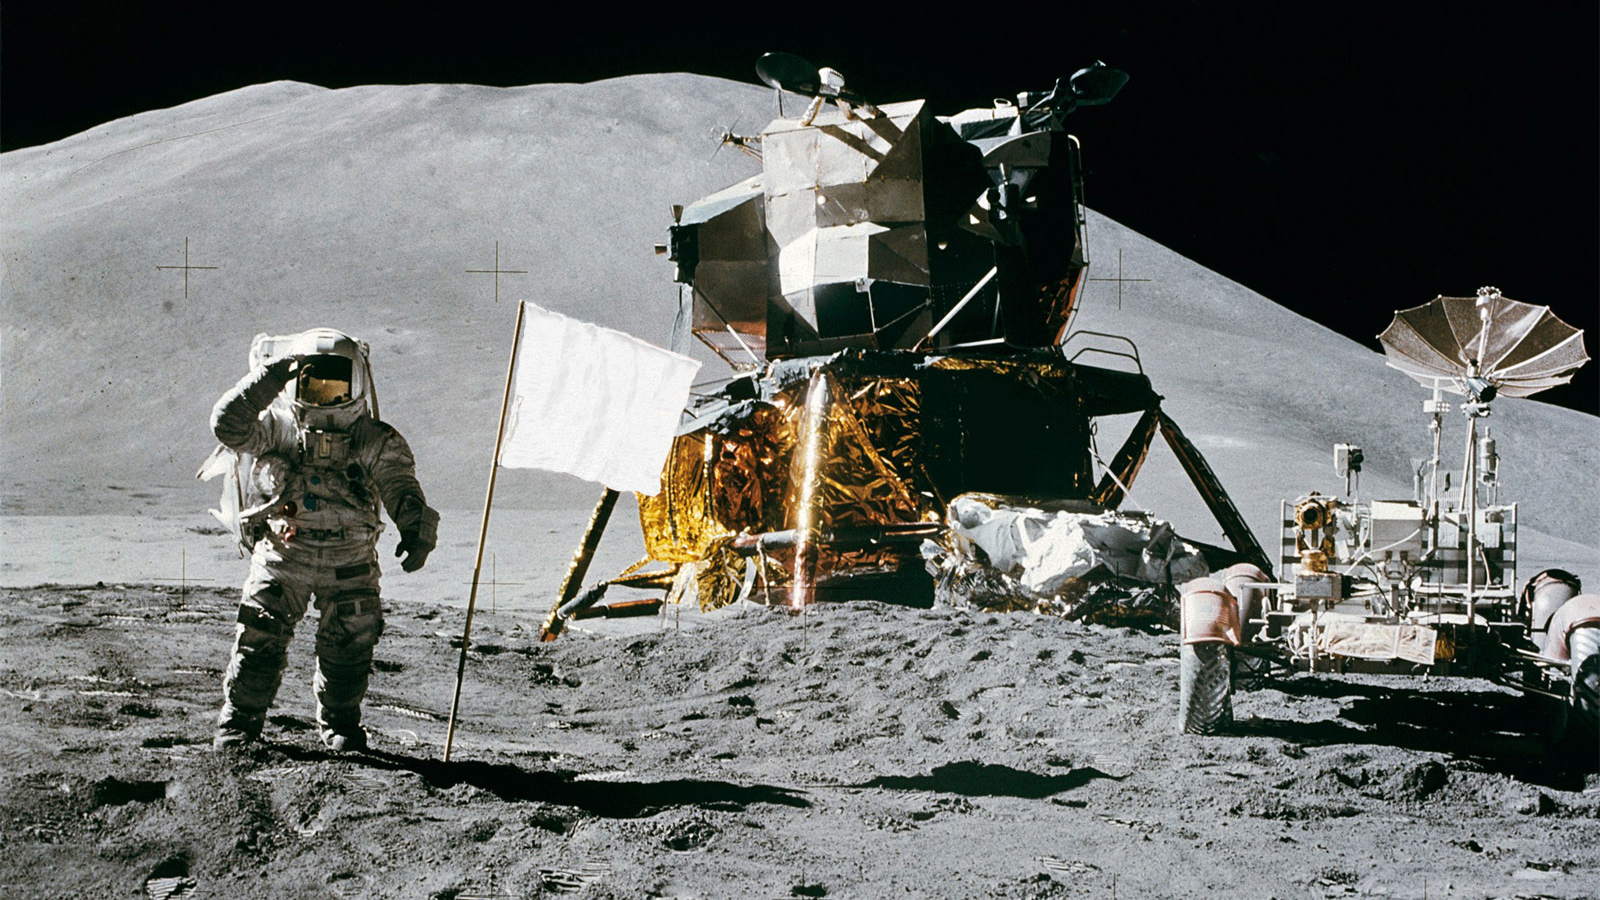 US-Flagge vom Mond geklaut all us flags on the moon are gone or white moon landing thruth discovert by china